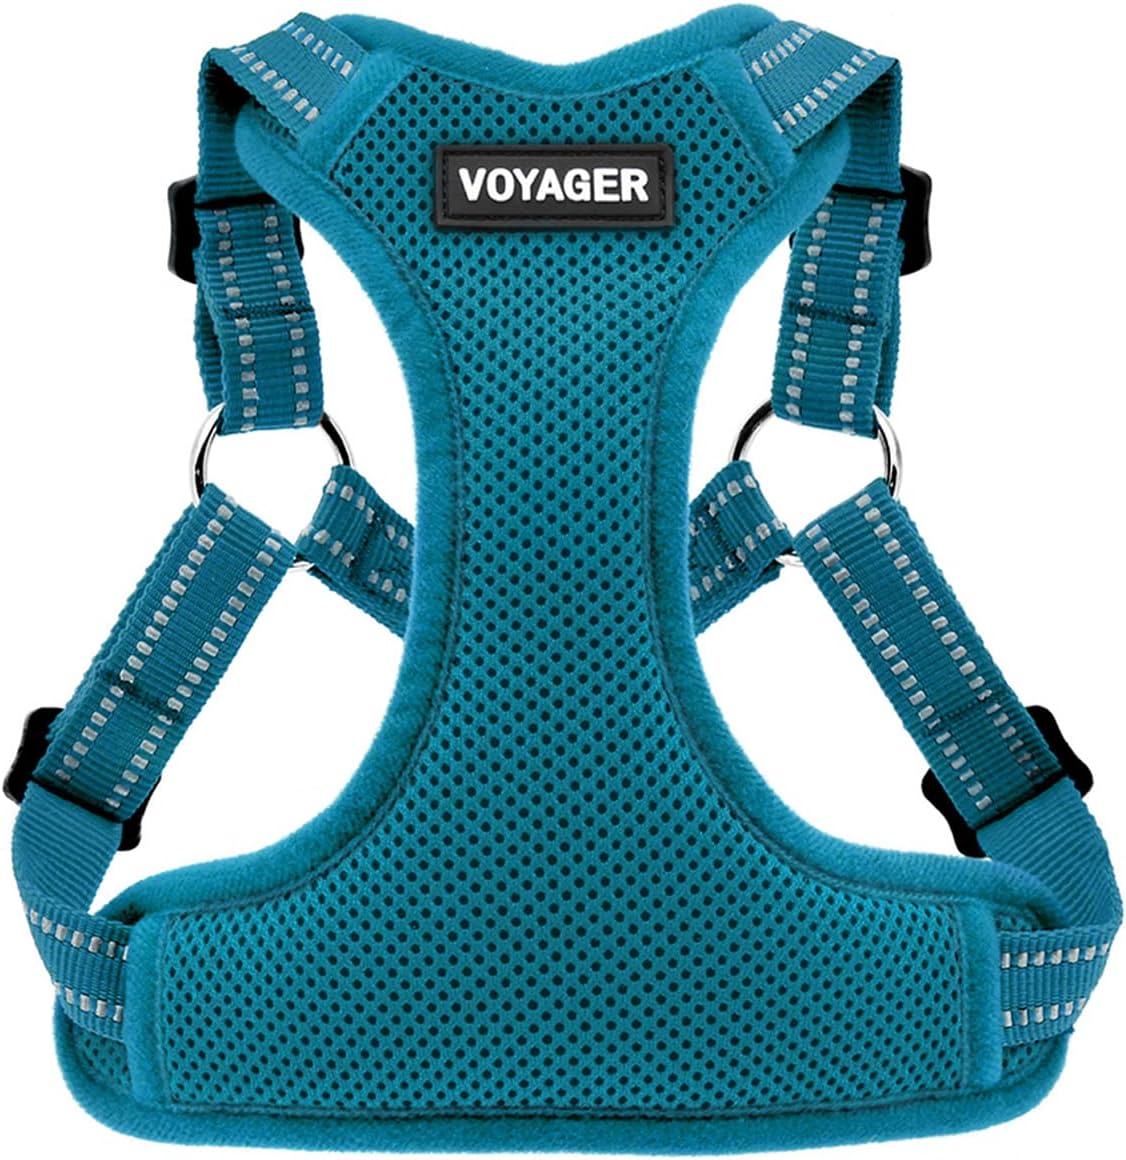 Best Pet Supplies Voyager Adjustable Dog Harness with Reflective Stripes for Walking, Jogging, Heavy-Duty Full Body No Pull Vest with Leash D-Ring, Breathable All-Weather - Harness (Turquoise), L